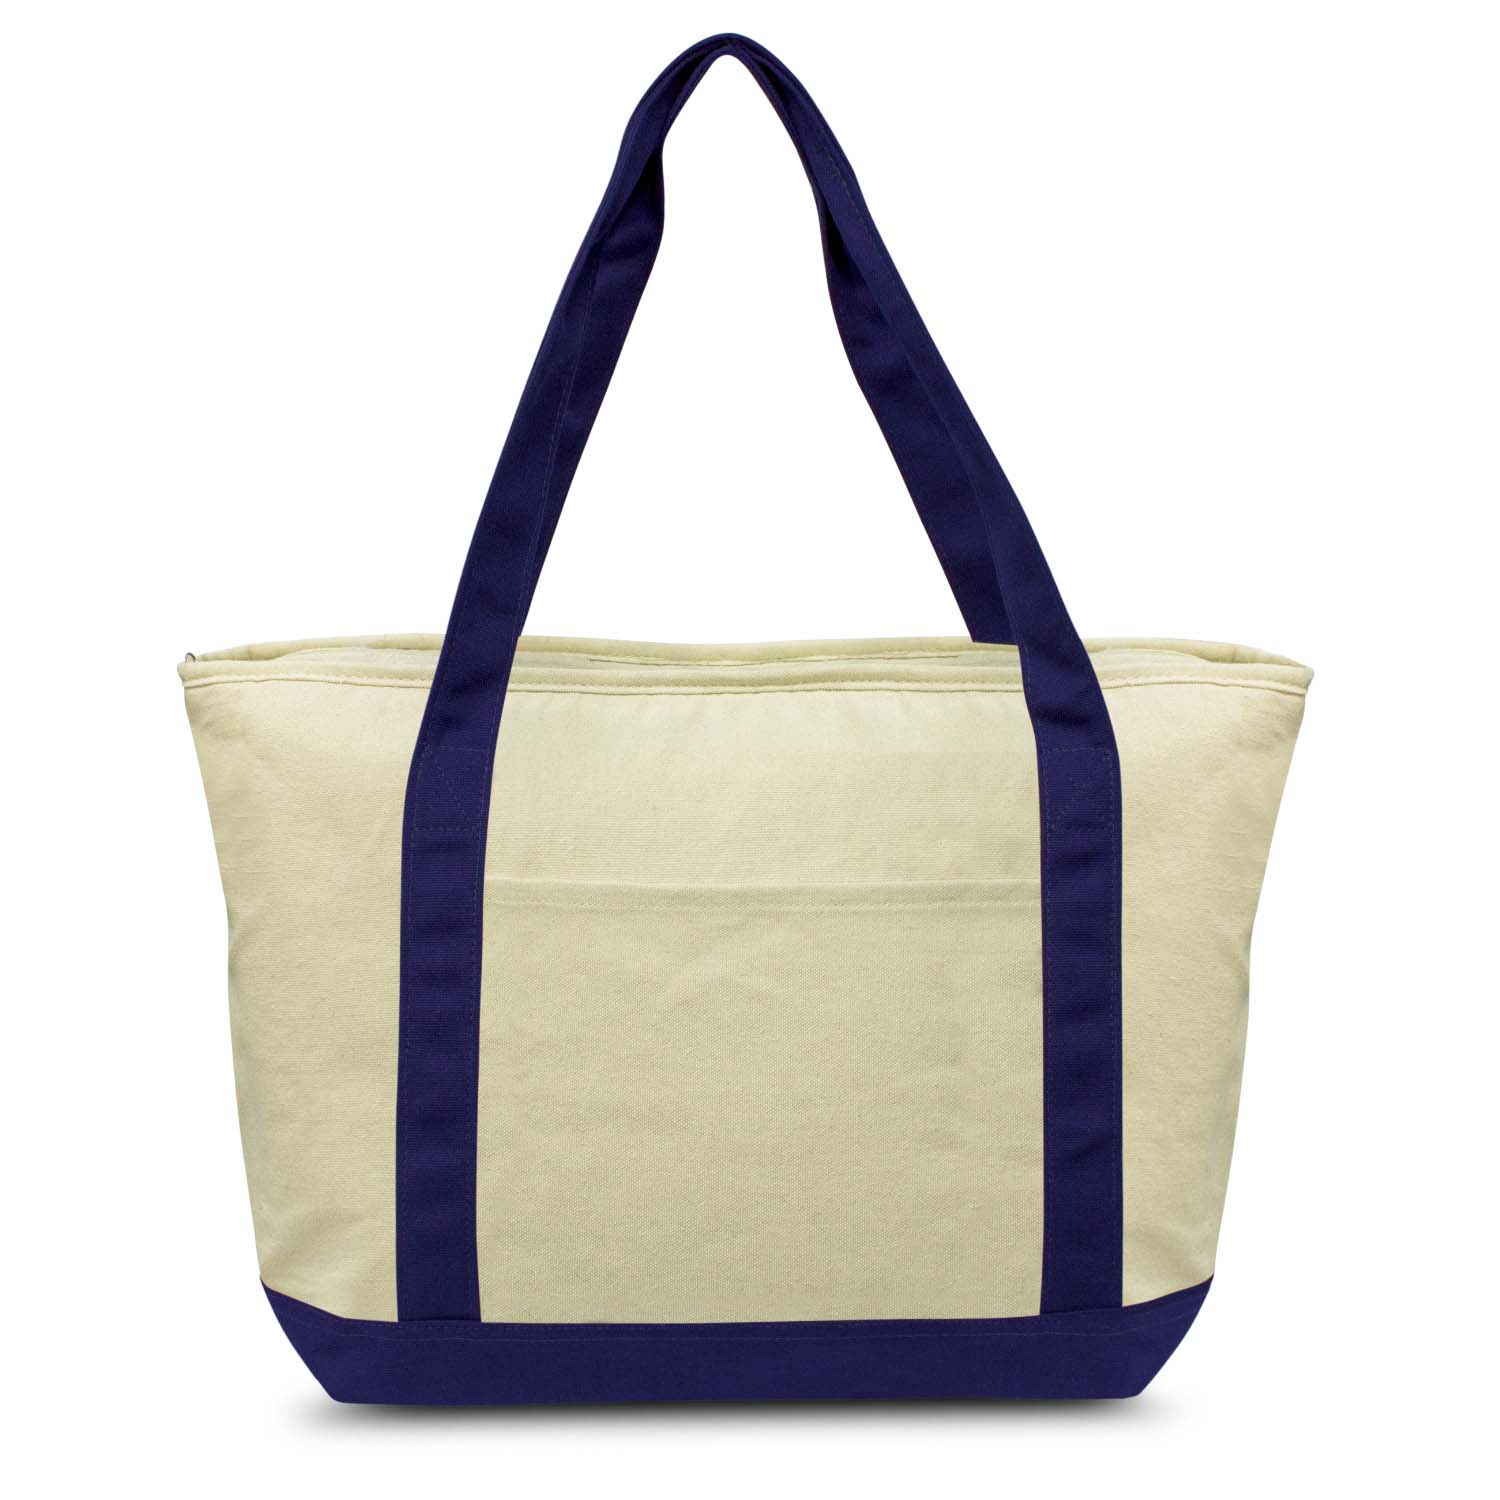 Promotional Calico Cooler Bags in Australia